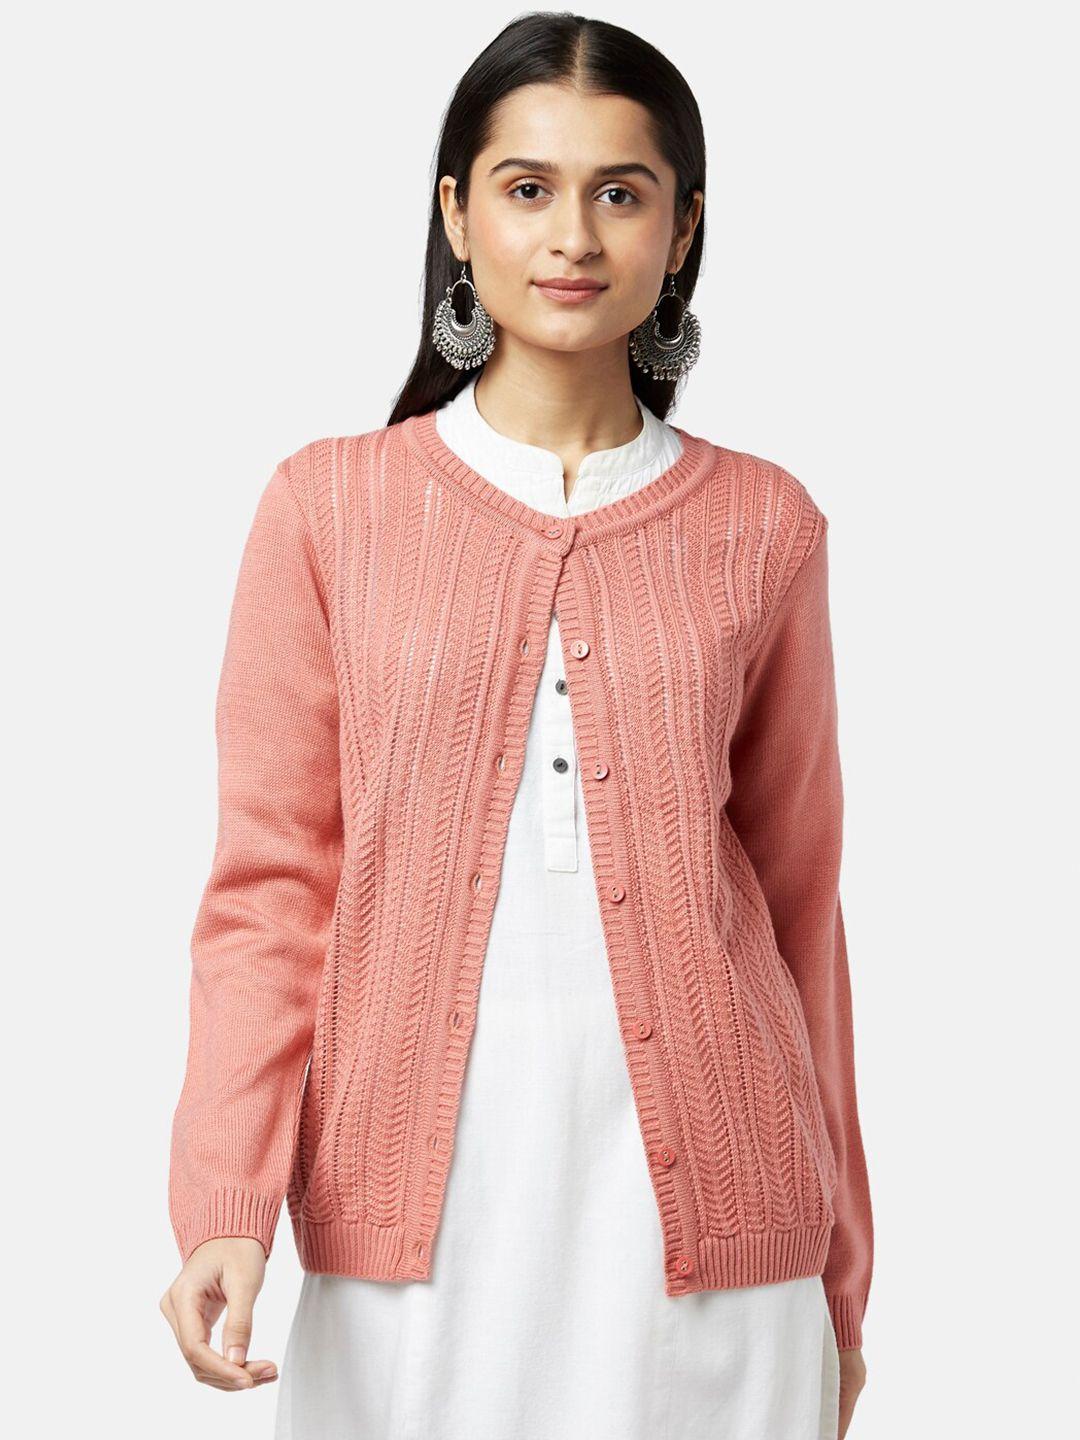 rangmanch by pantaloons women coral cable knit cardigan